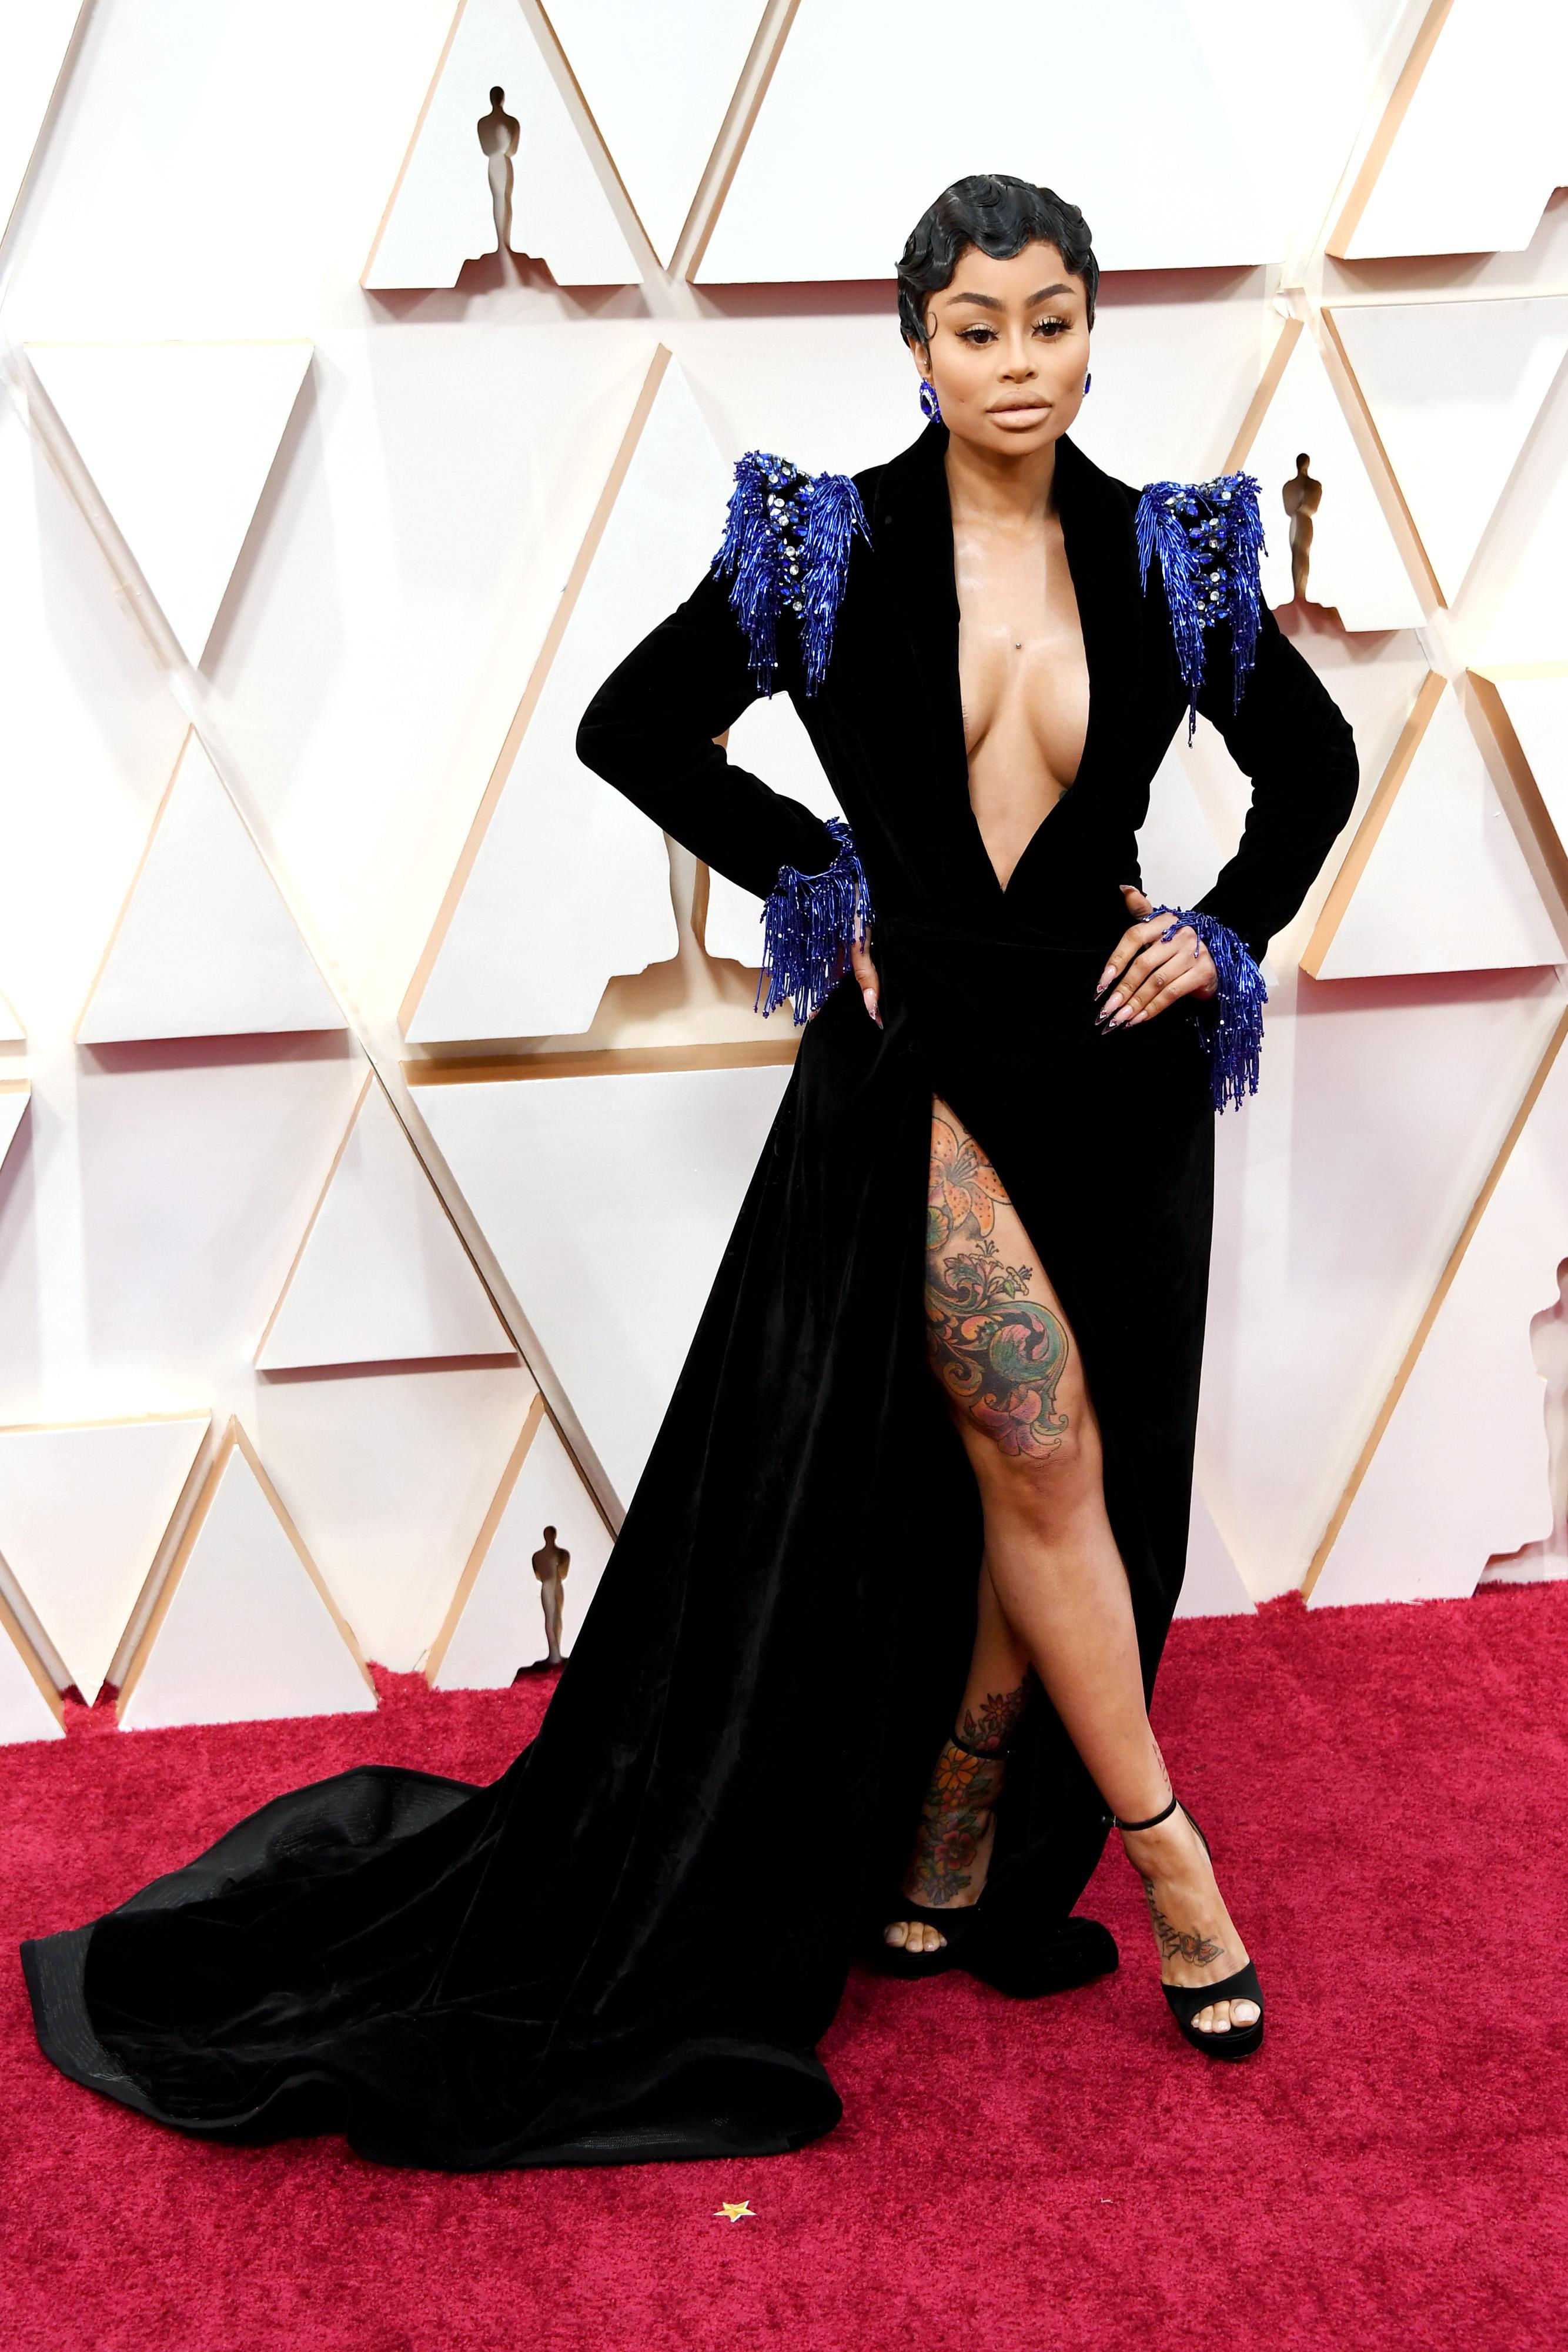 Blac Chyna Walks Oscars 2020 Red Carpet, People Confused